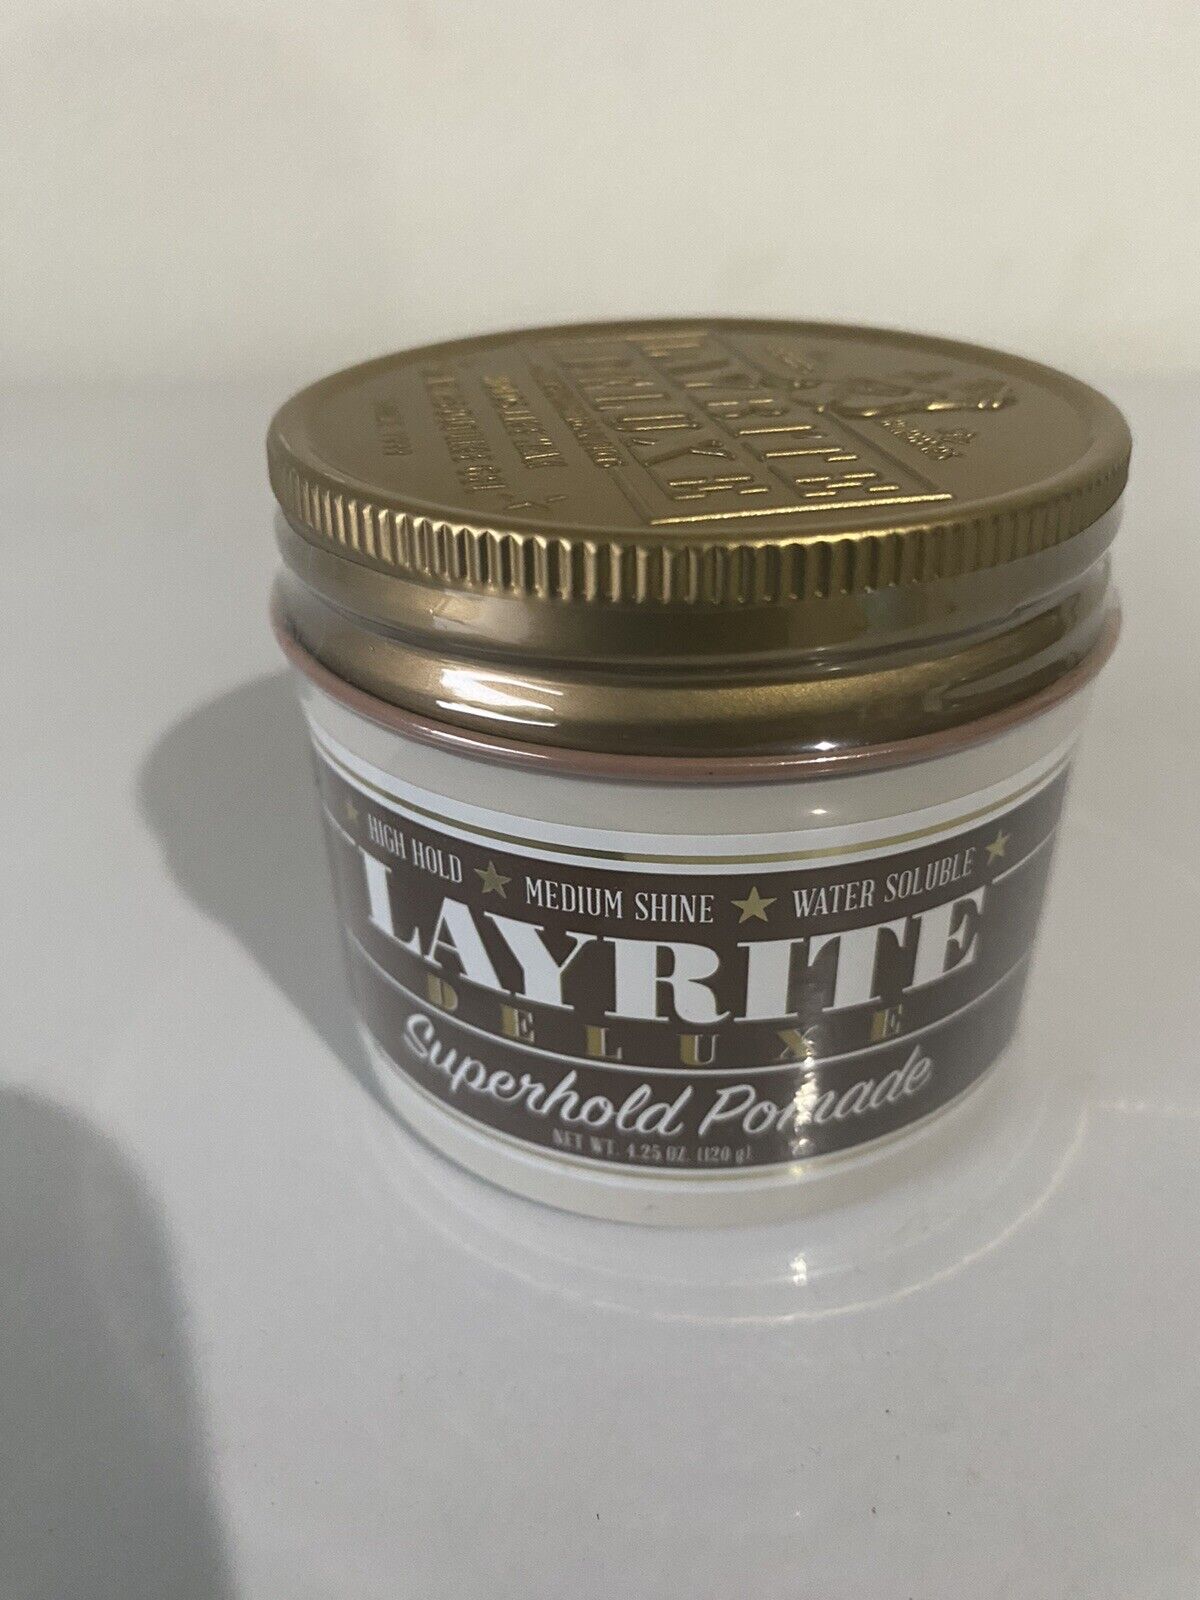 Layrite Deluxe Superhold Pomade 4.25oz/120g New And Sealed. Ship Free Same Day